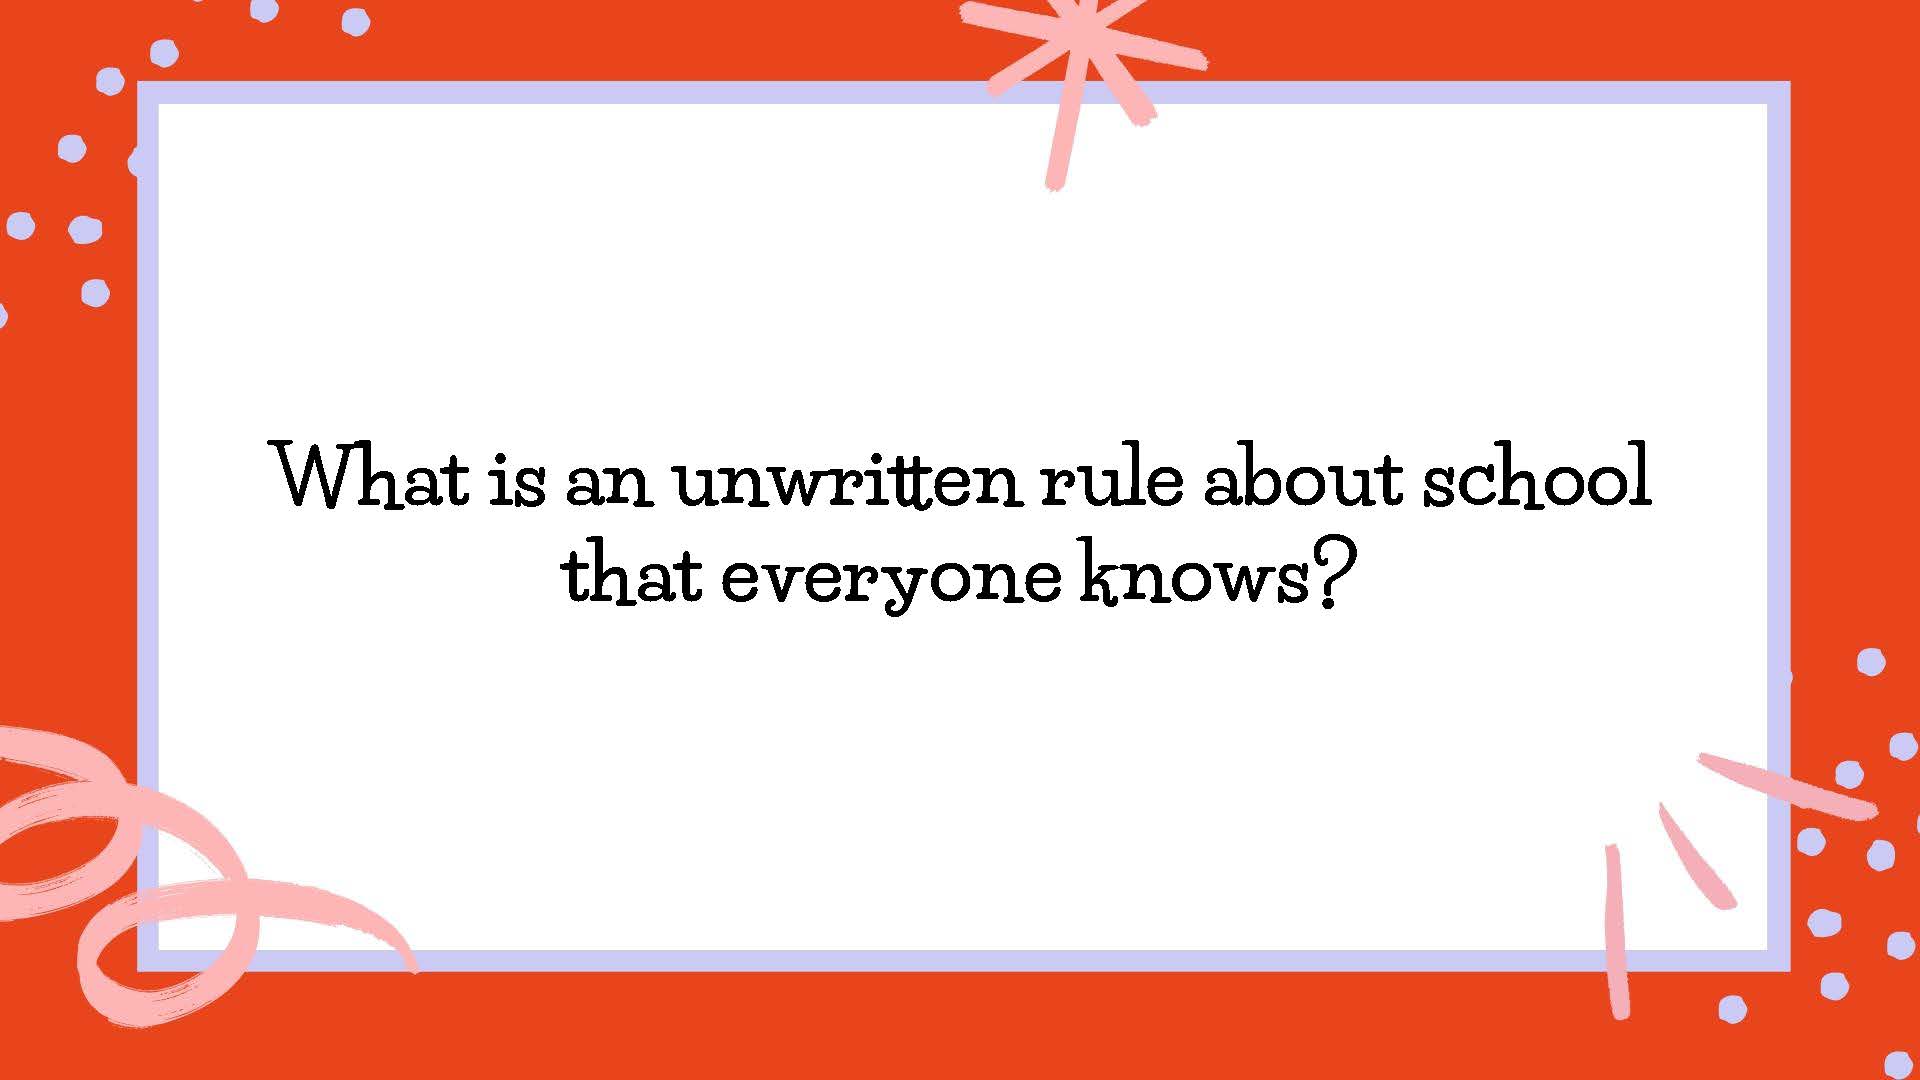 What is an unwritten rule about school that everyone knows?